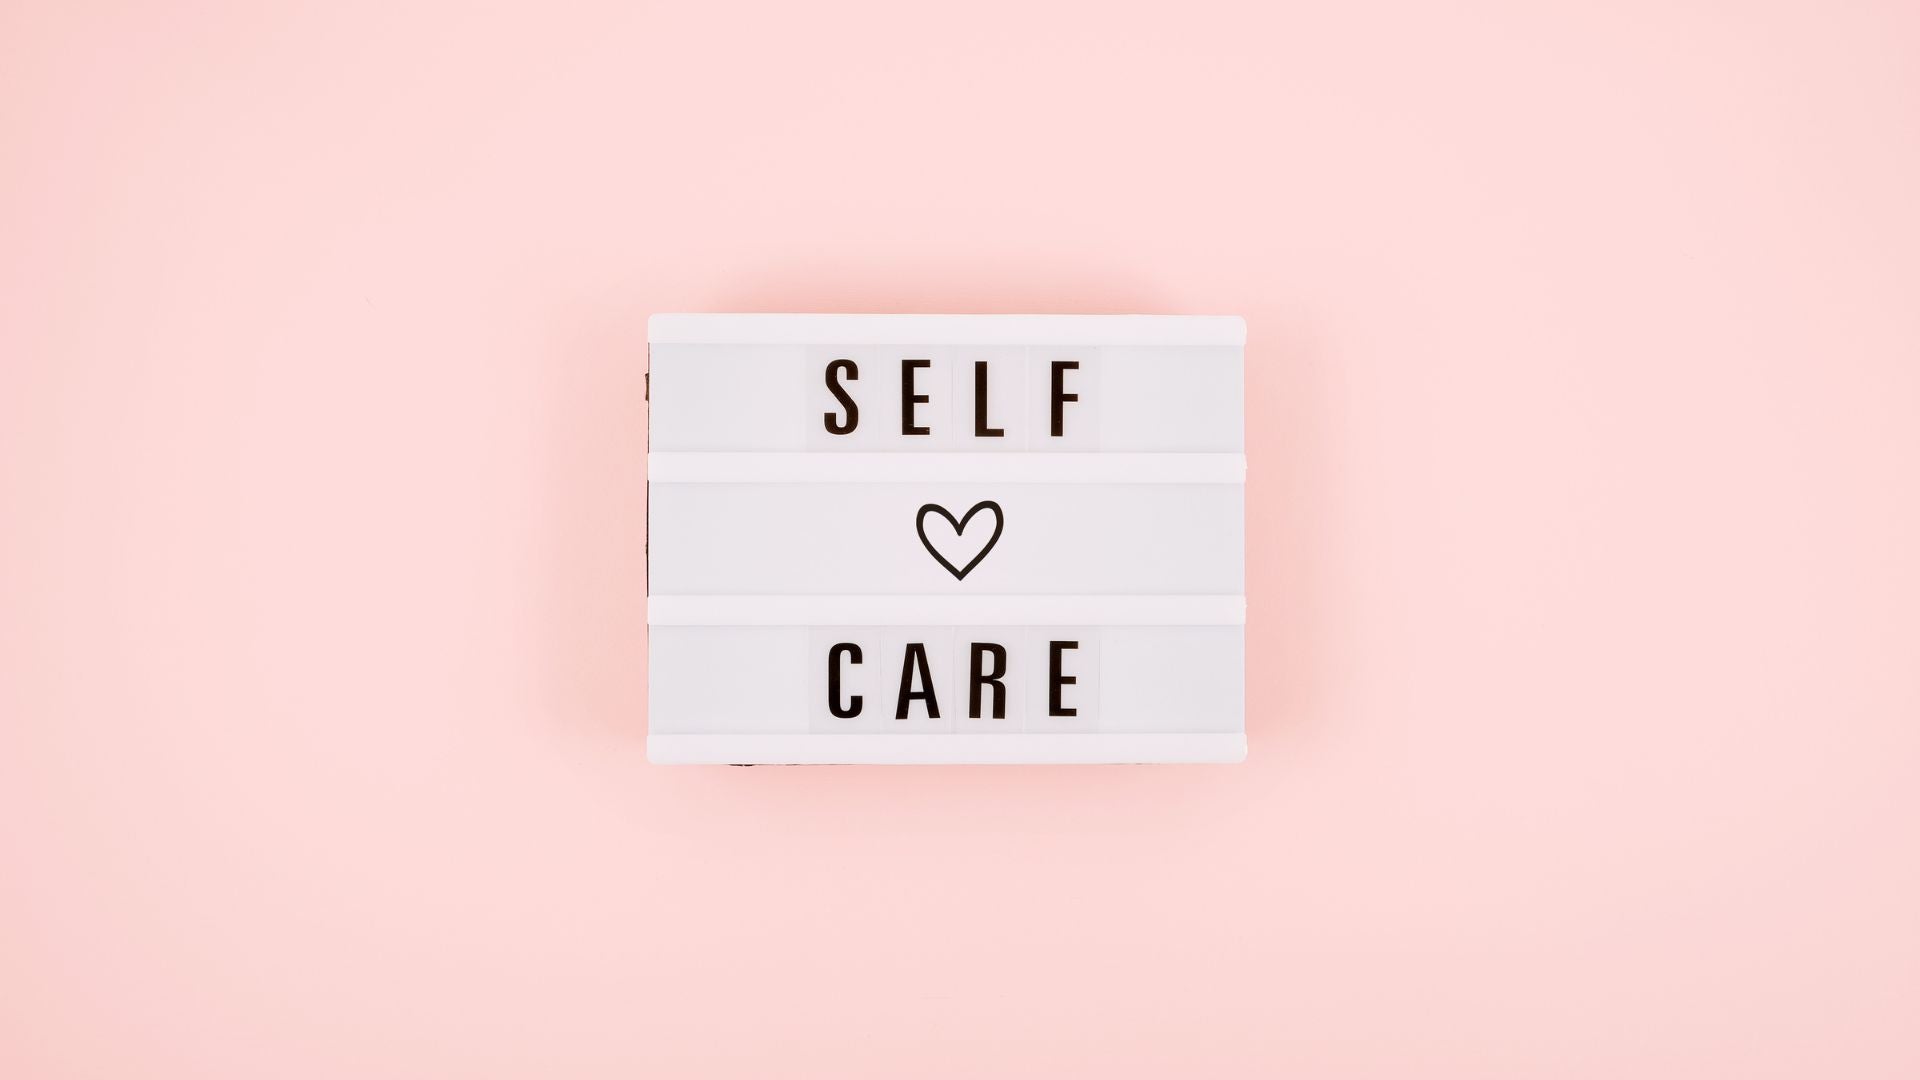 What is Selfcare and Why it is good for your physical and mental health